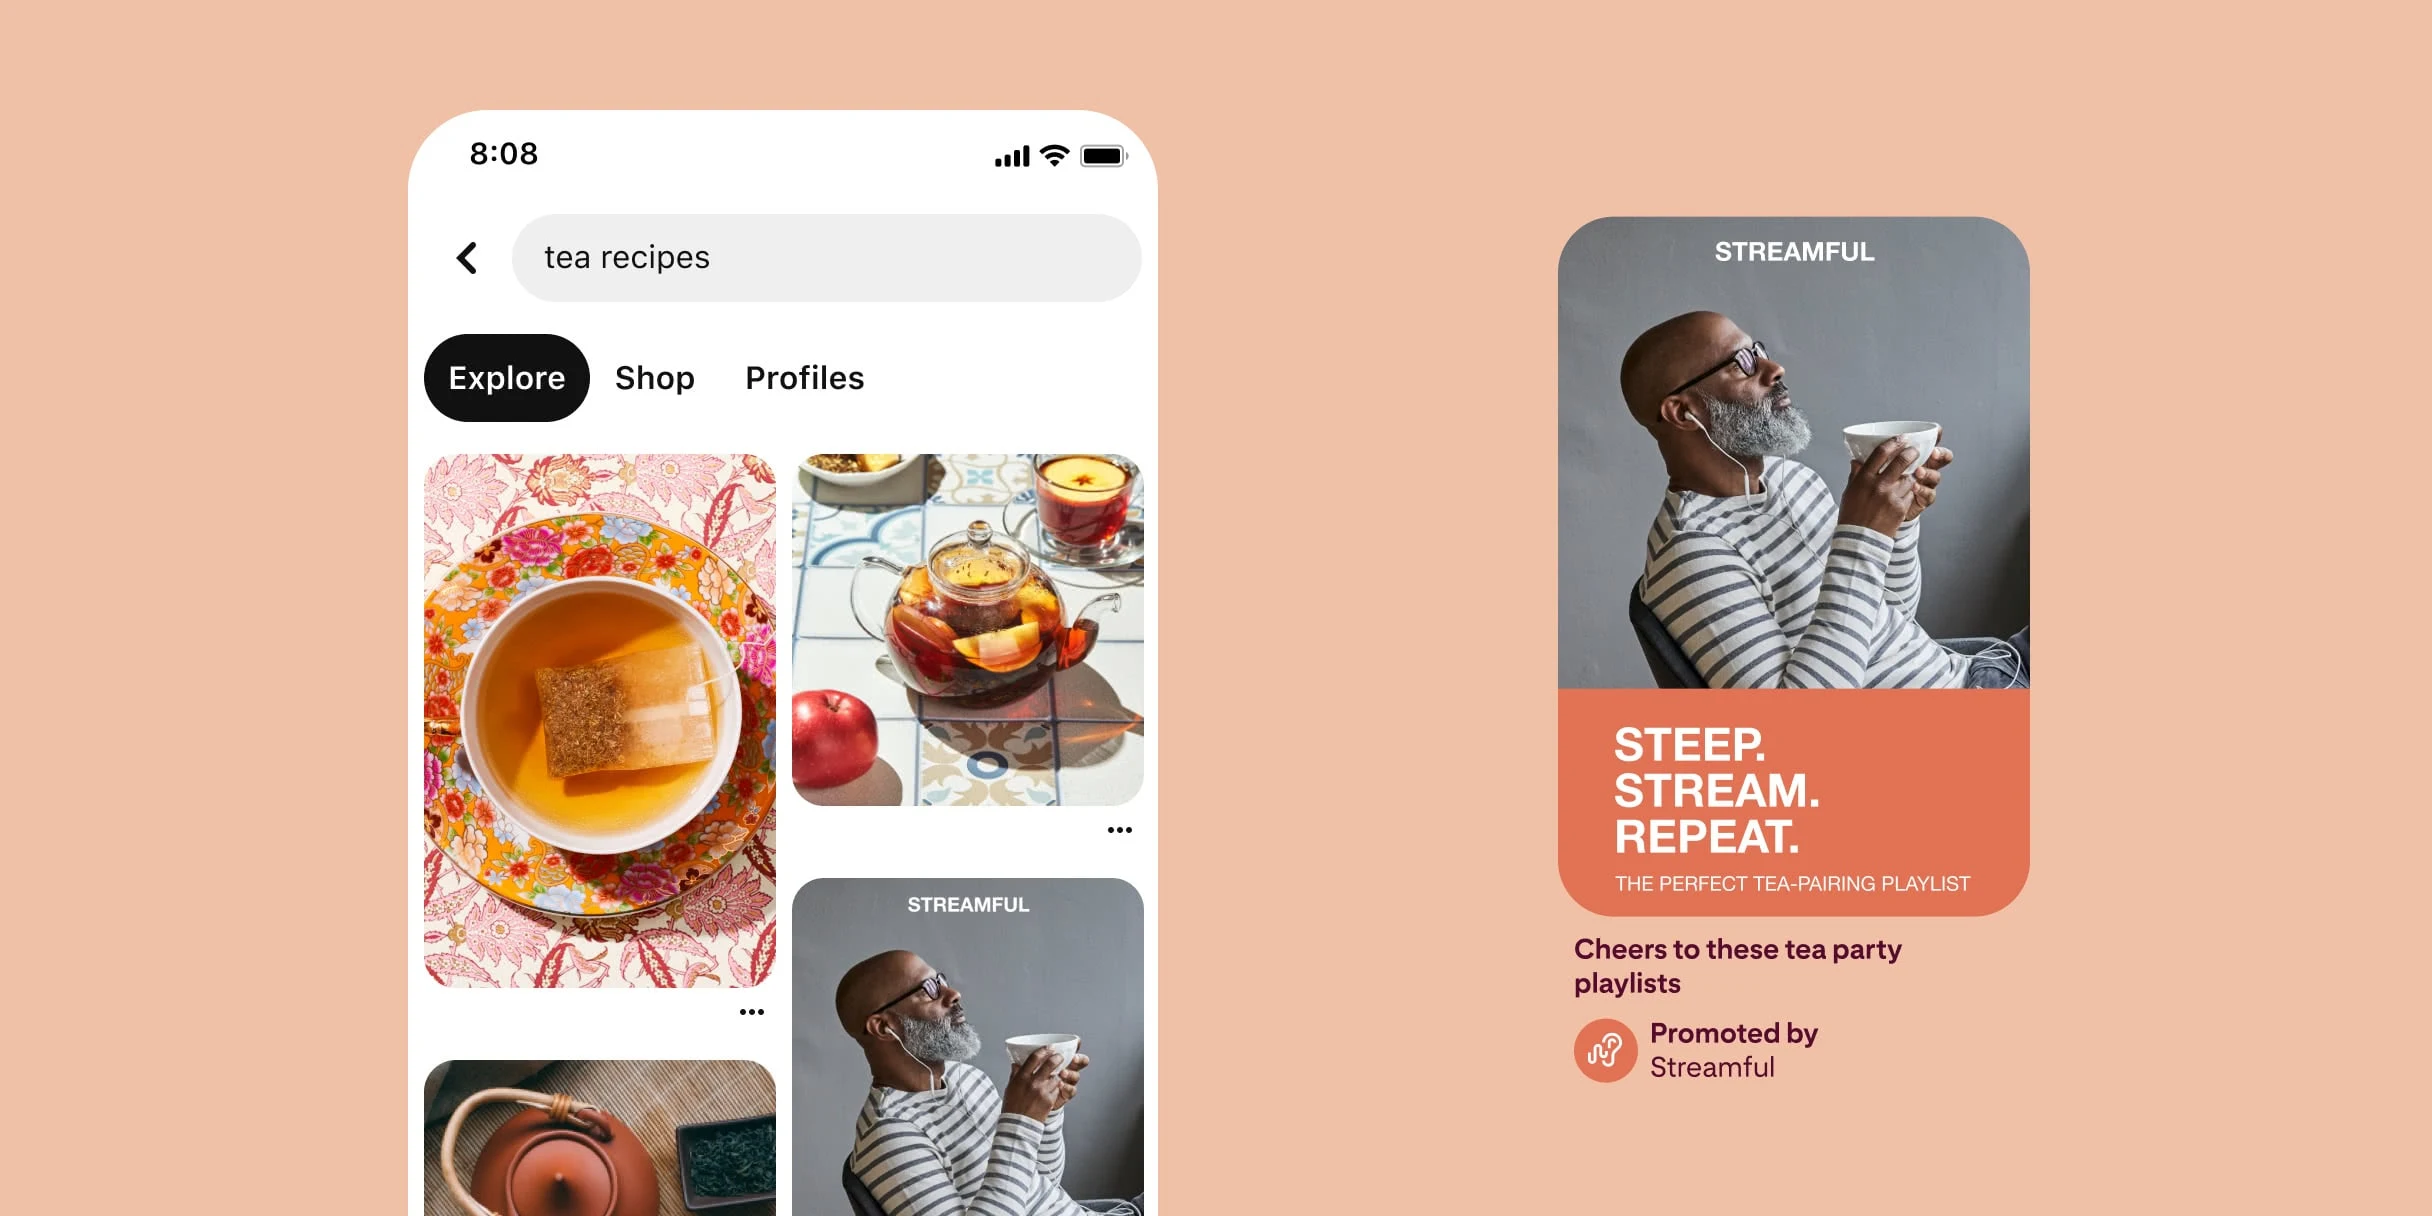 Pinterest search results for tea recipes. Top view of a teacup filled with tea and a teabag  over a colorful floral plate. Clear glass teapot filled with tea and apple slices. Top view of an orange cast iron tea kettle with loose tea next to it. Pin showcasing bearded black man with eyeglasses and earbuds holding a cup of tea. Text that reads steep. Stream. Repeat. The perfect tea-pairing playlist. Description reads cheers to these tea party playlists. 